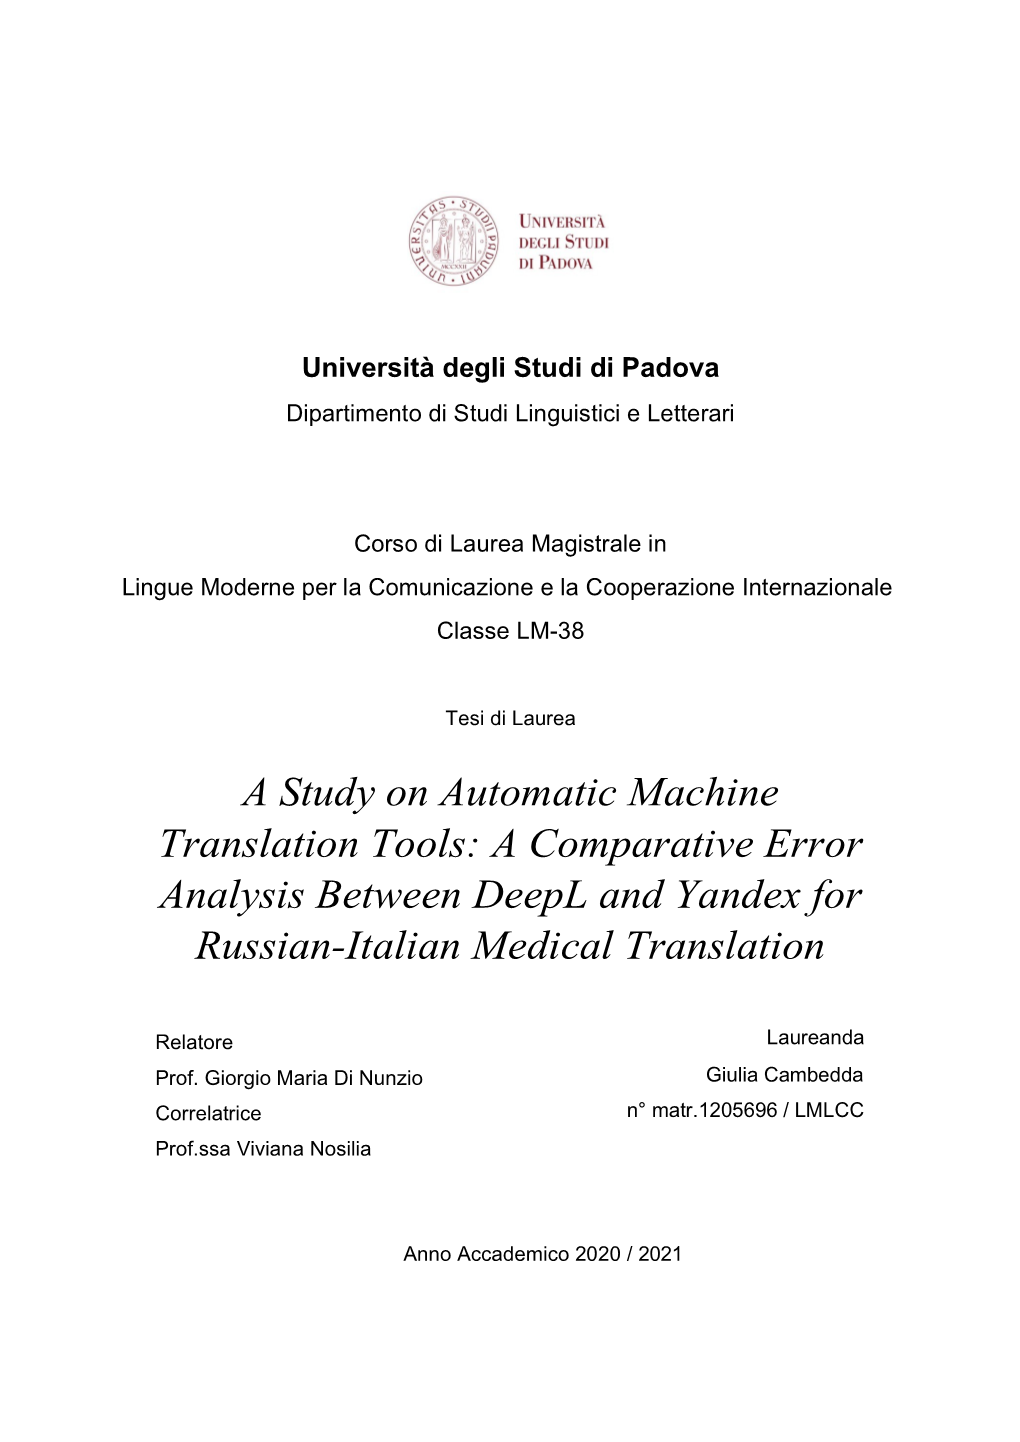 A Study on Automatic Machine Translation Tools: a Comparative Error Analysis Between Deepl and Yandex for Russian-Italian Medical Translation